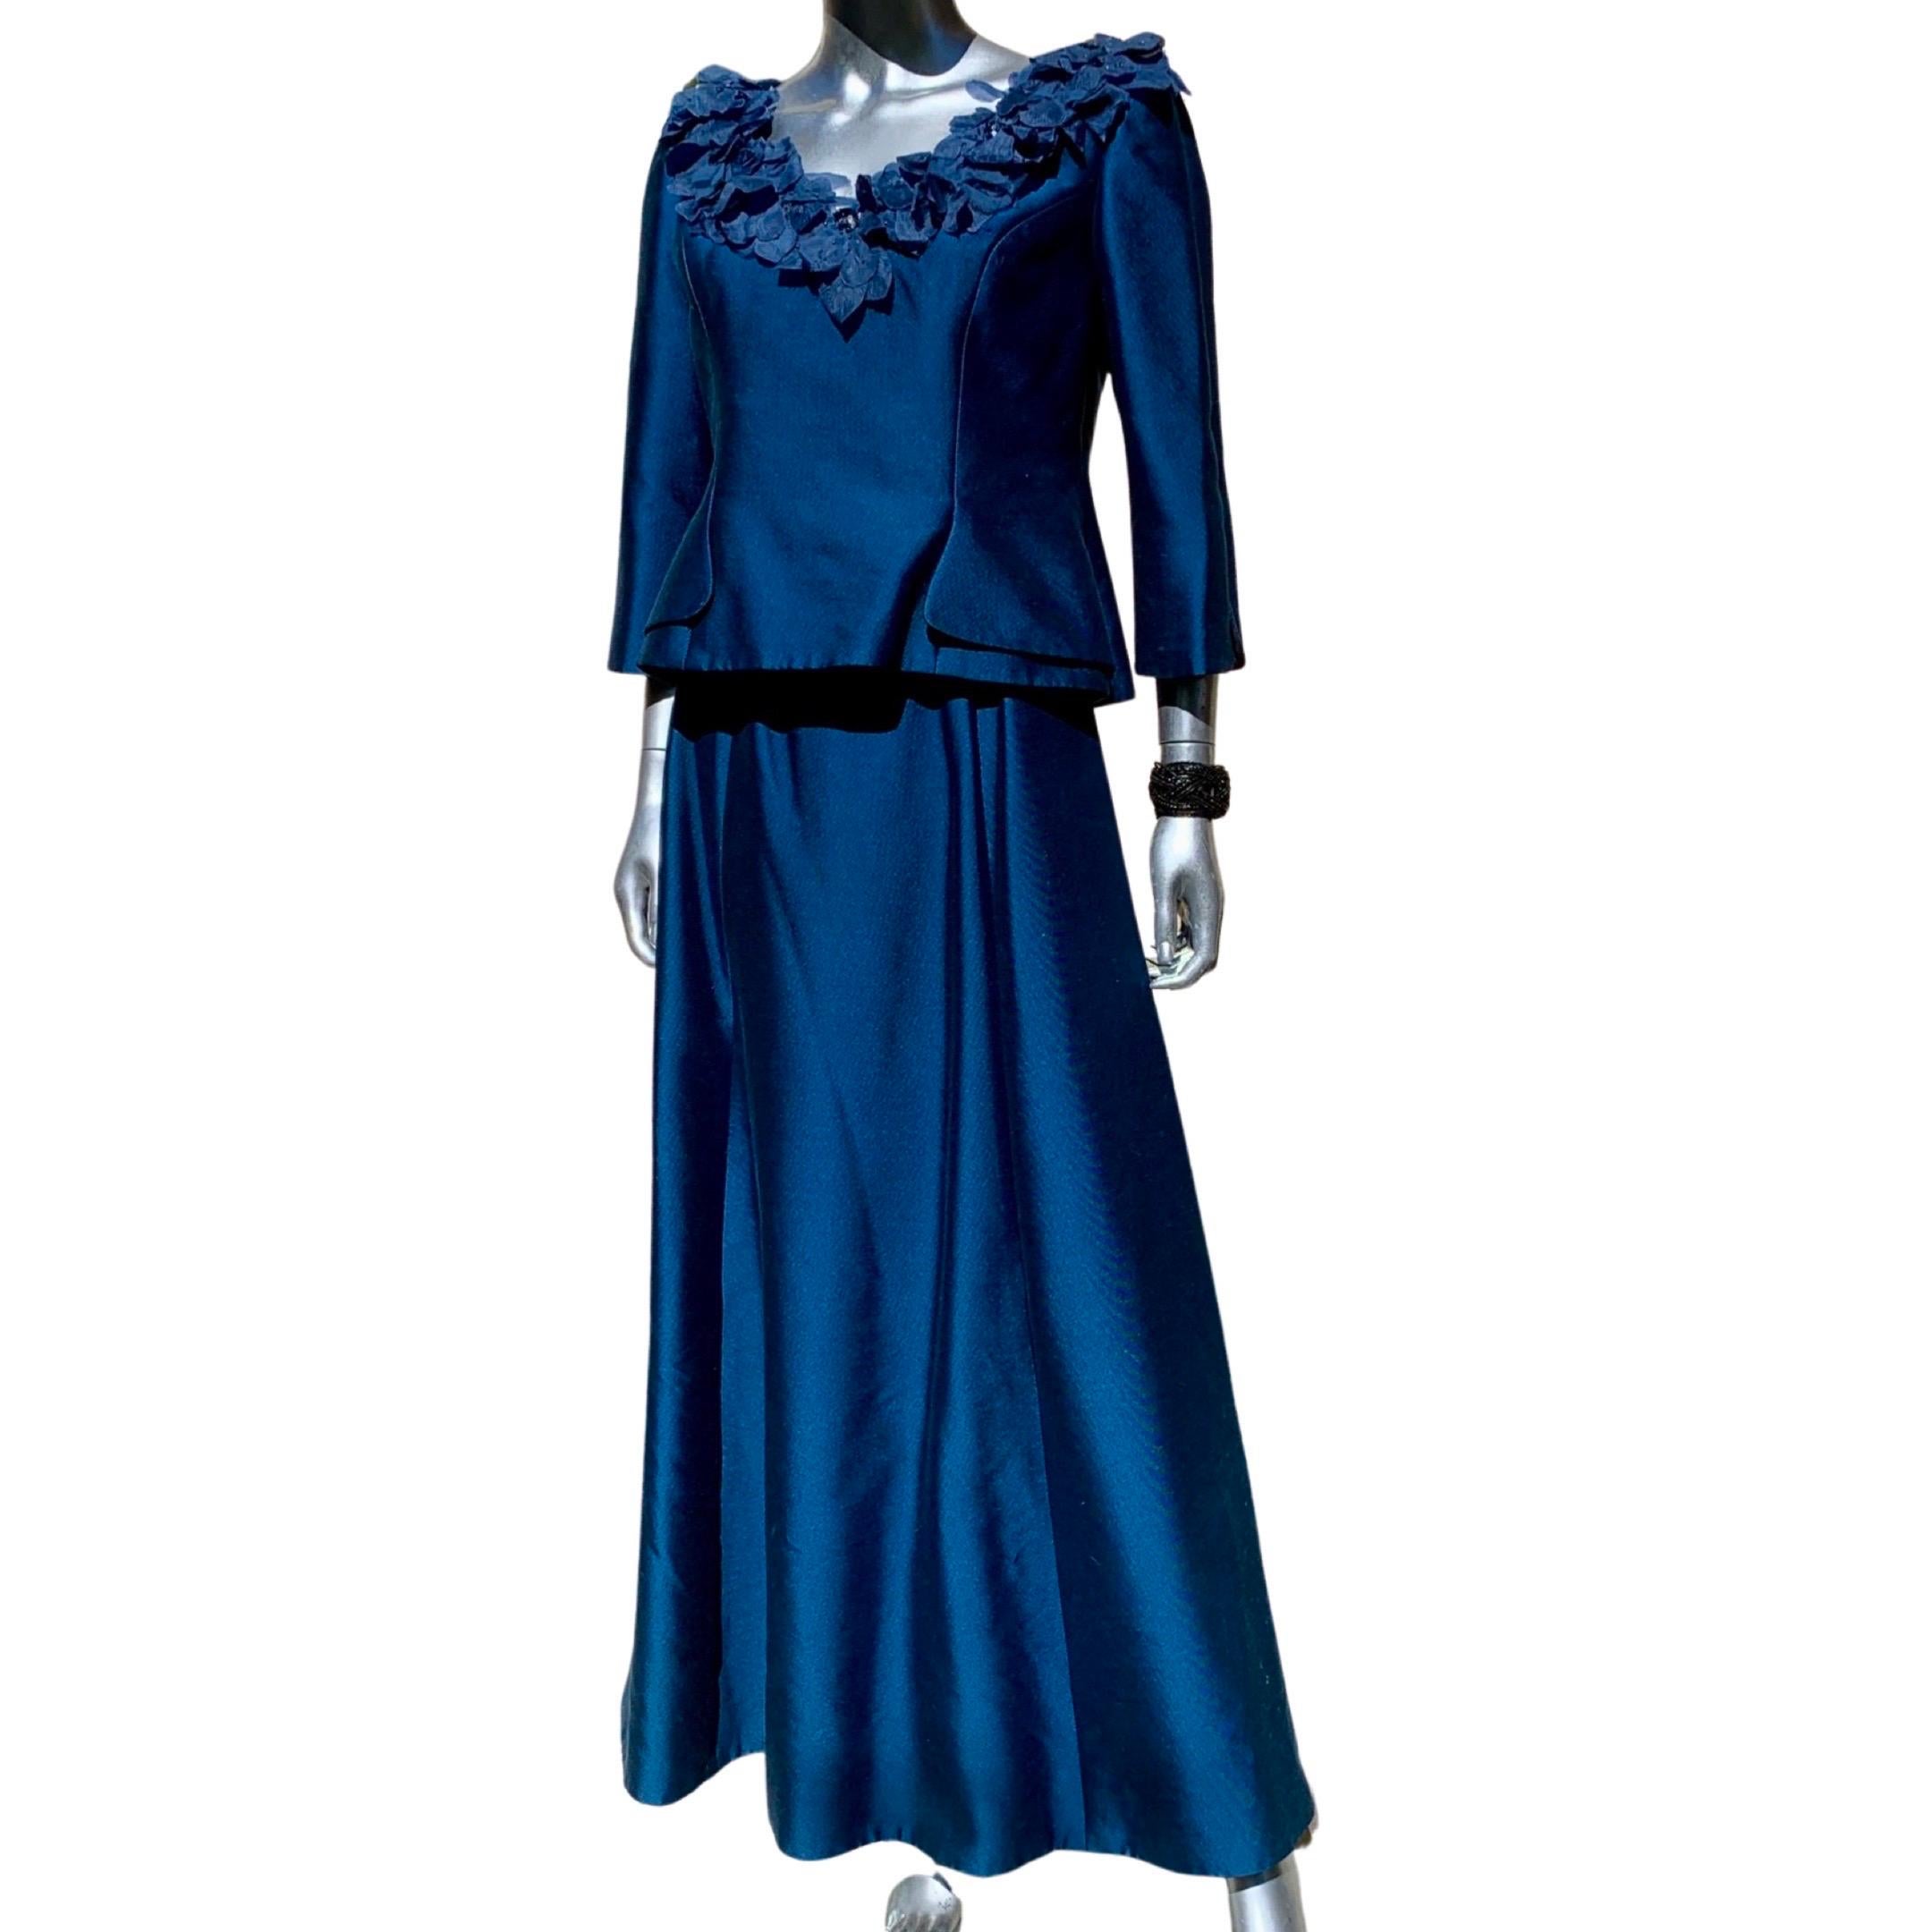 Three Piece Saphire Blue Couture Evening Ensemble by Lily Samii SF Size 8 For Sale 9